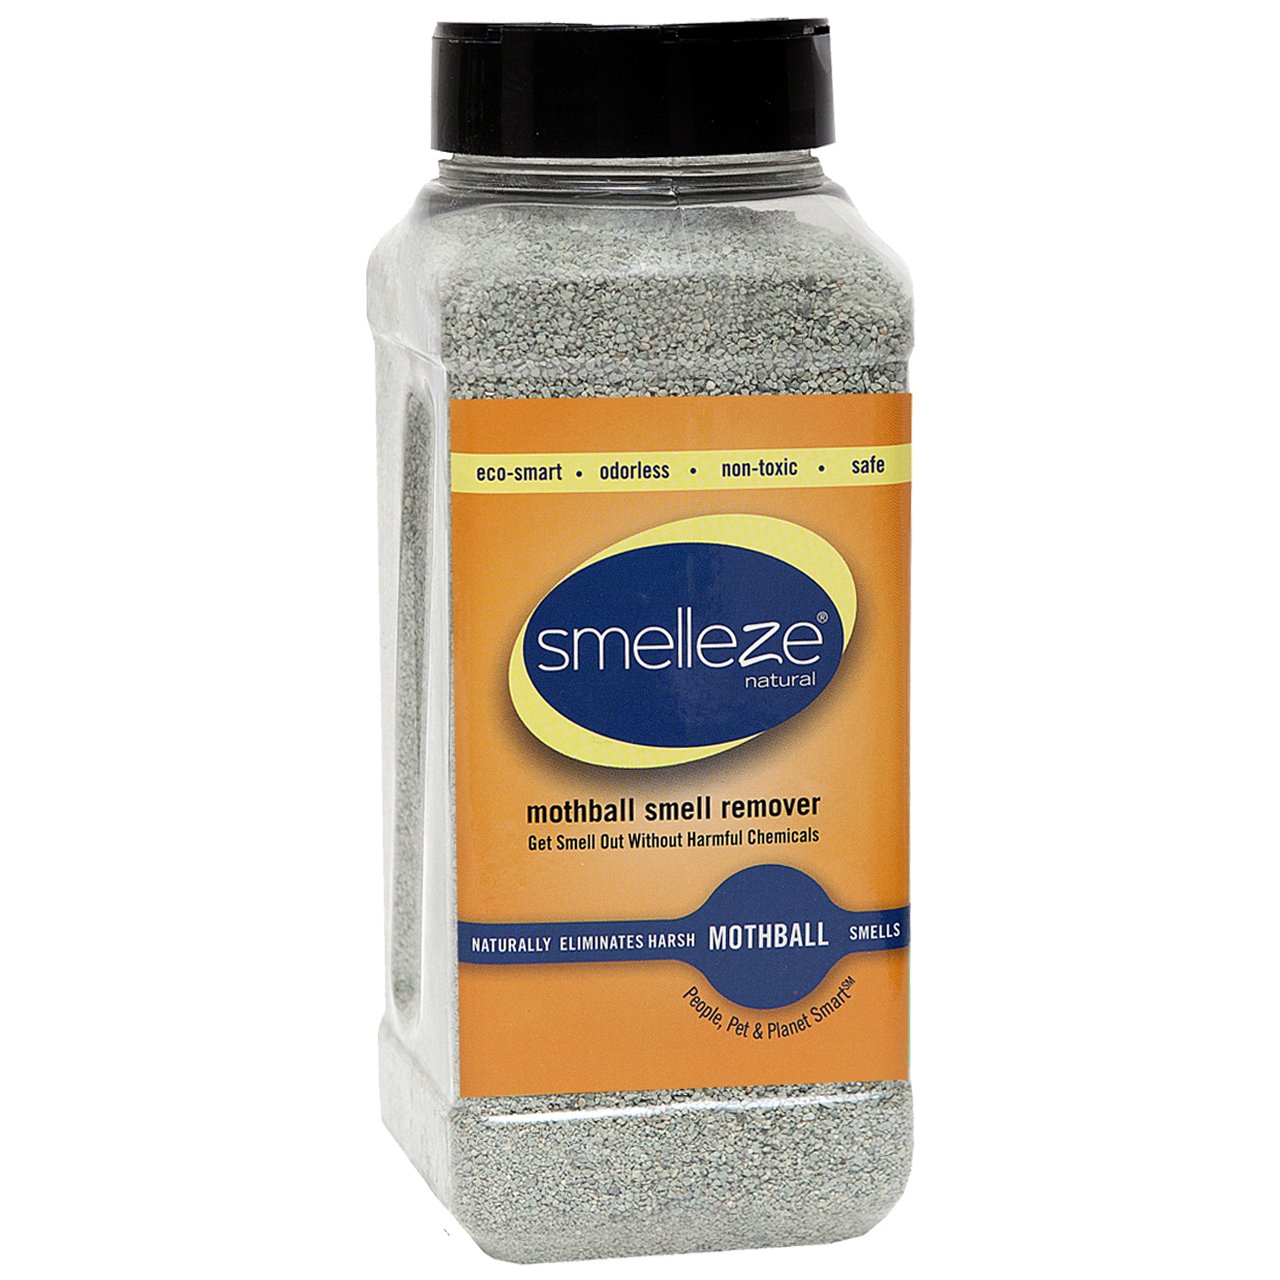 Smelleze Natural Moth Ball Smell Remover Deodorizer: 2 lb. Granules Gets Mothball Fumes